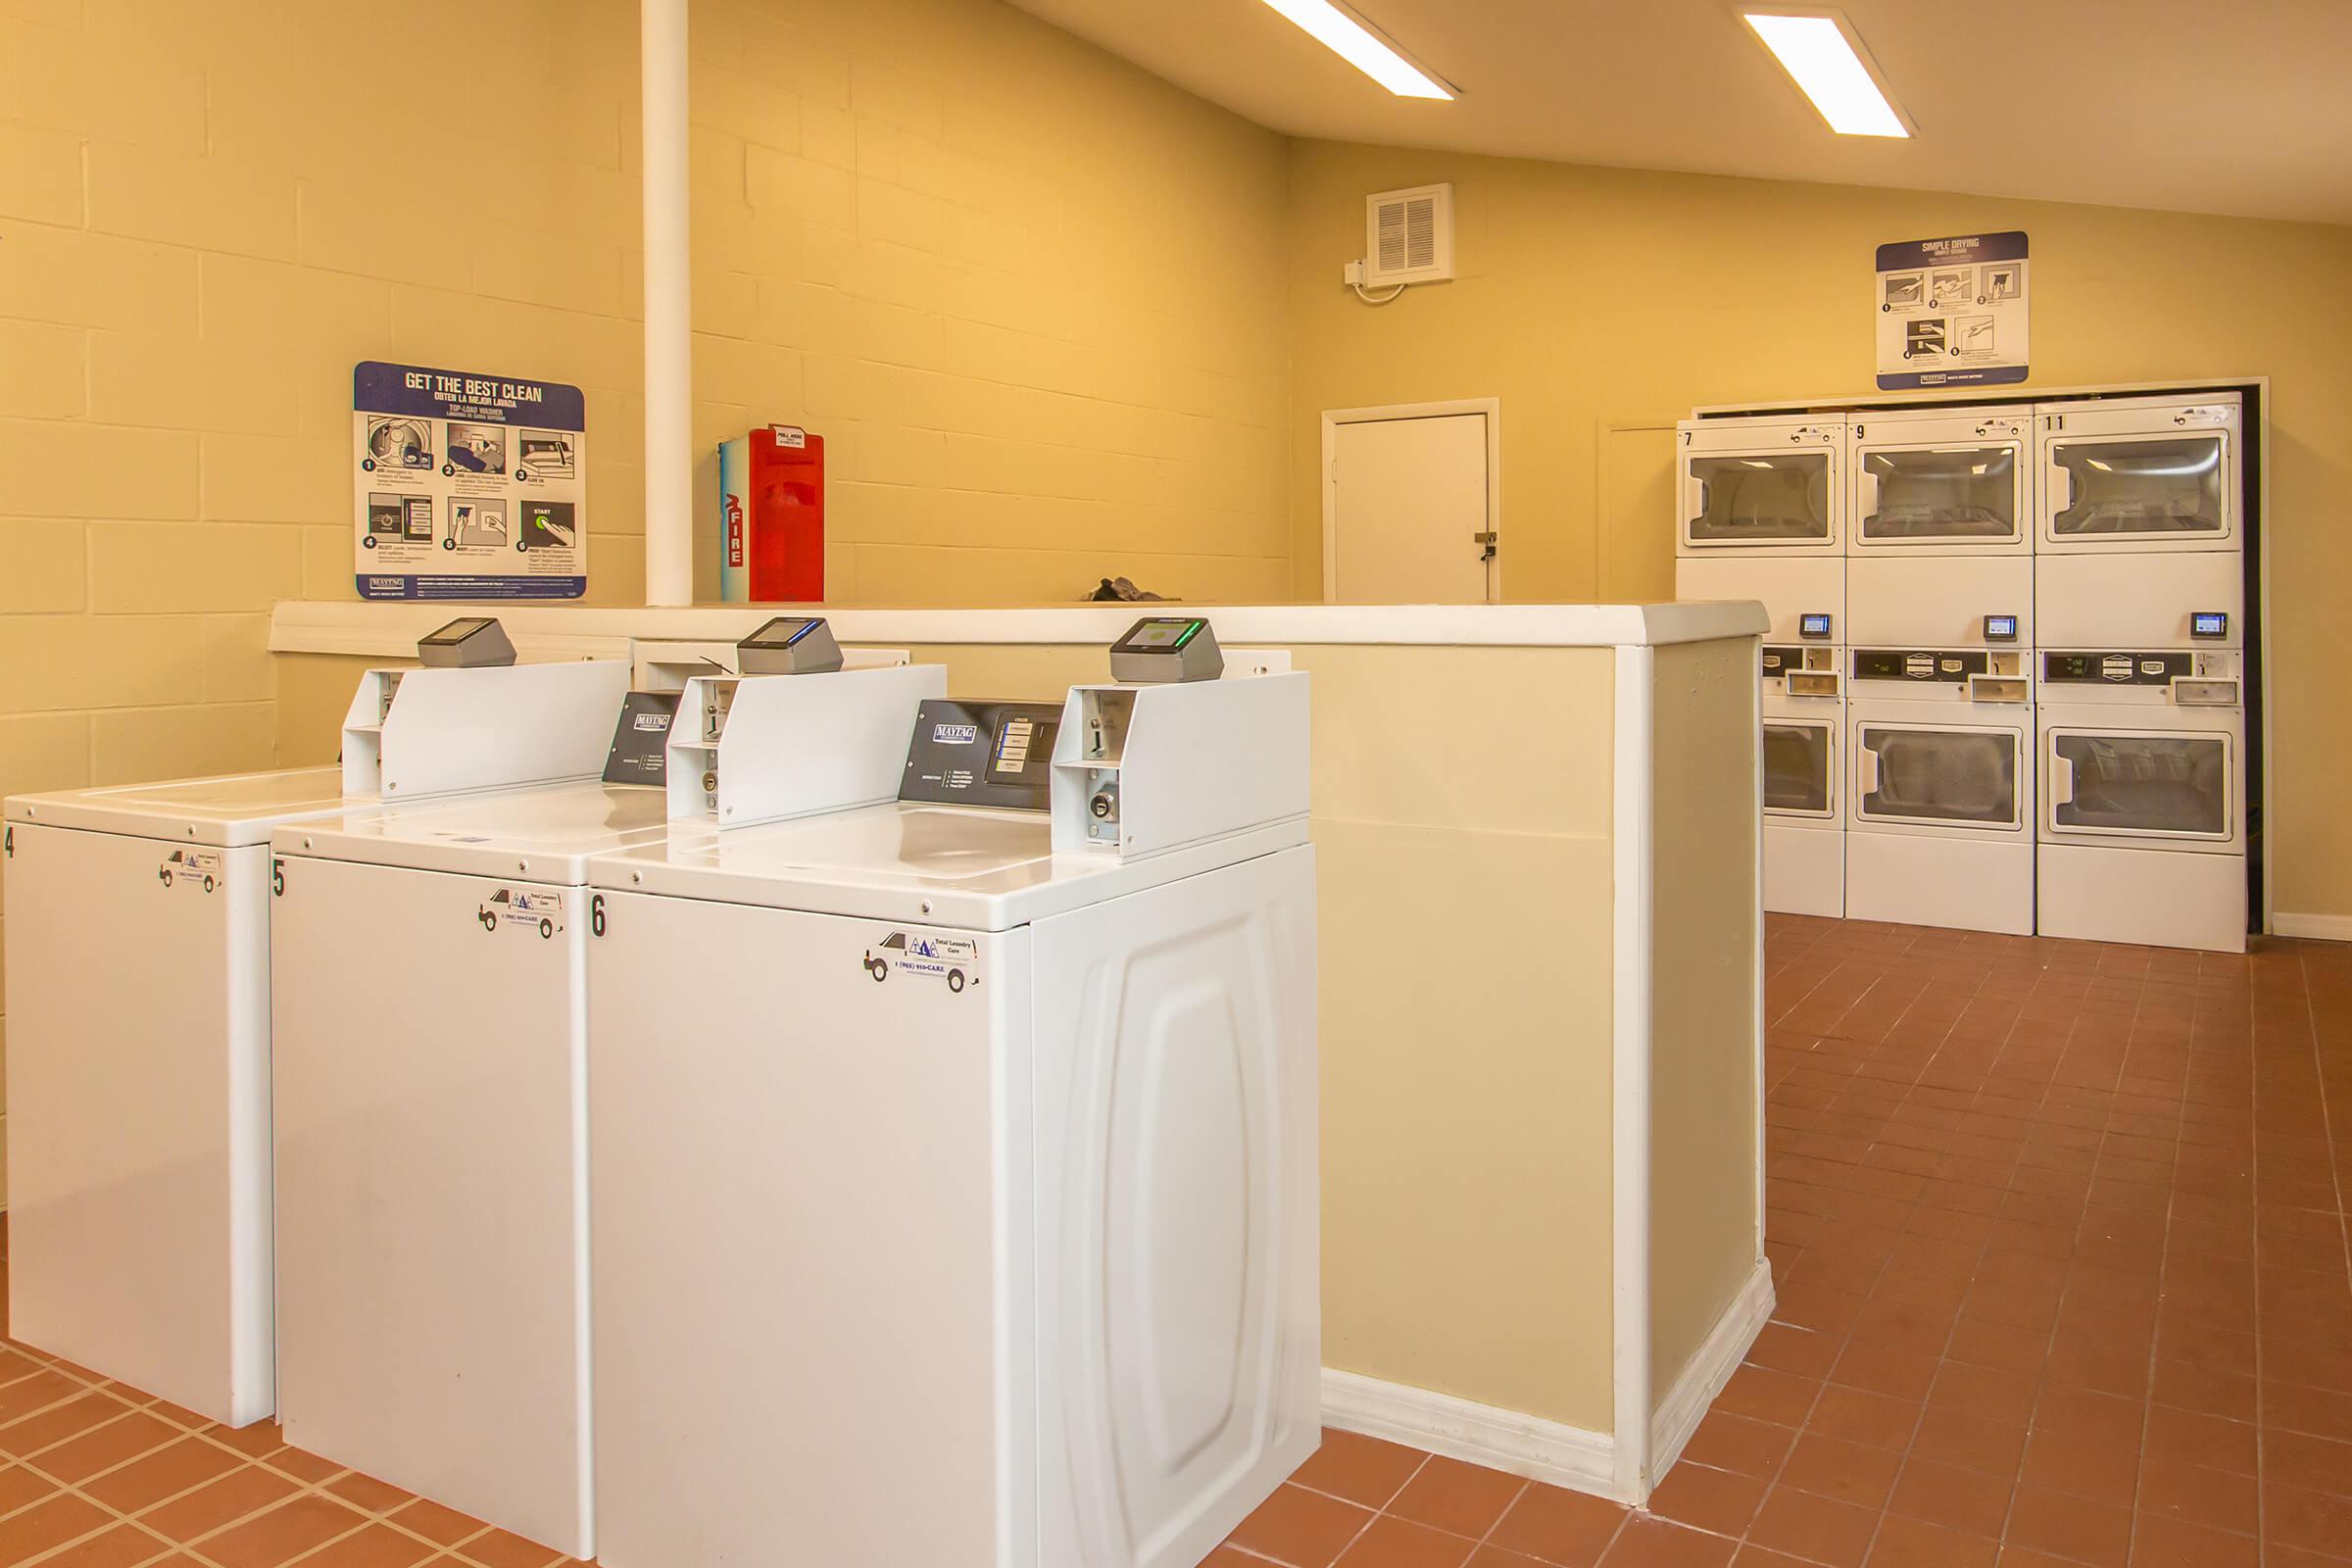 ON-SITE RESIDENT LAUNDRY FACILITY